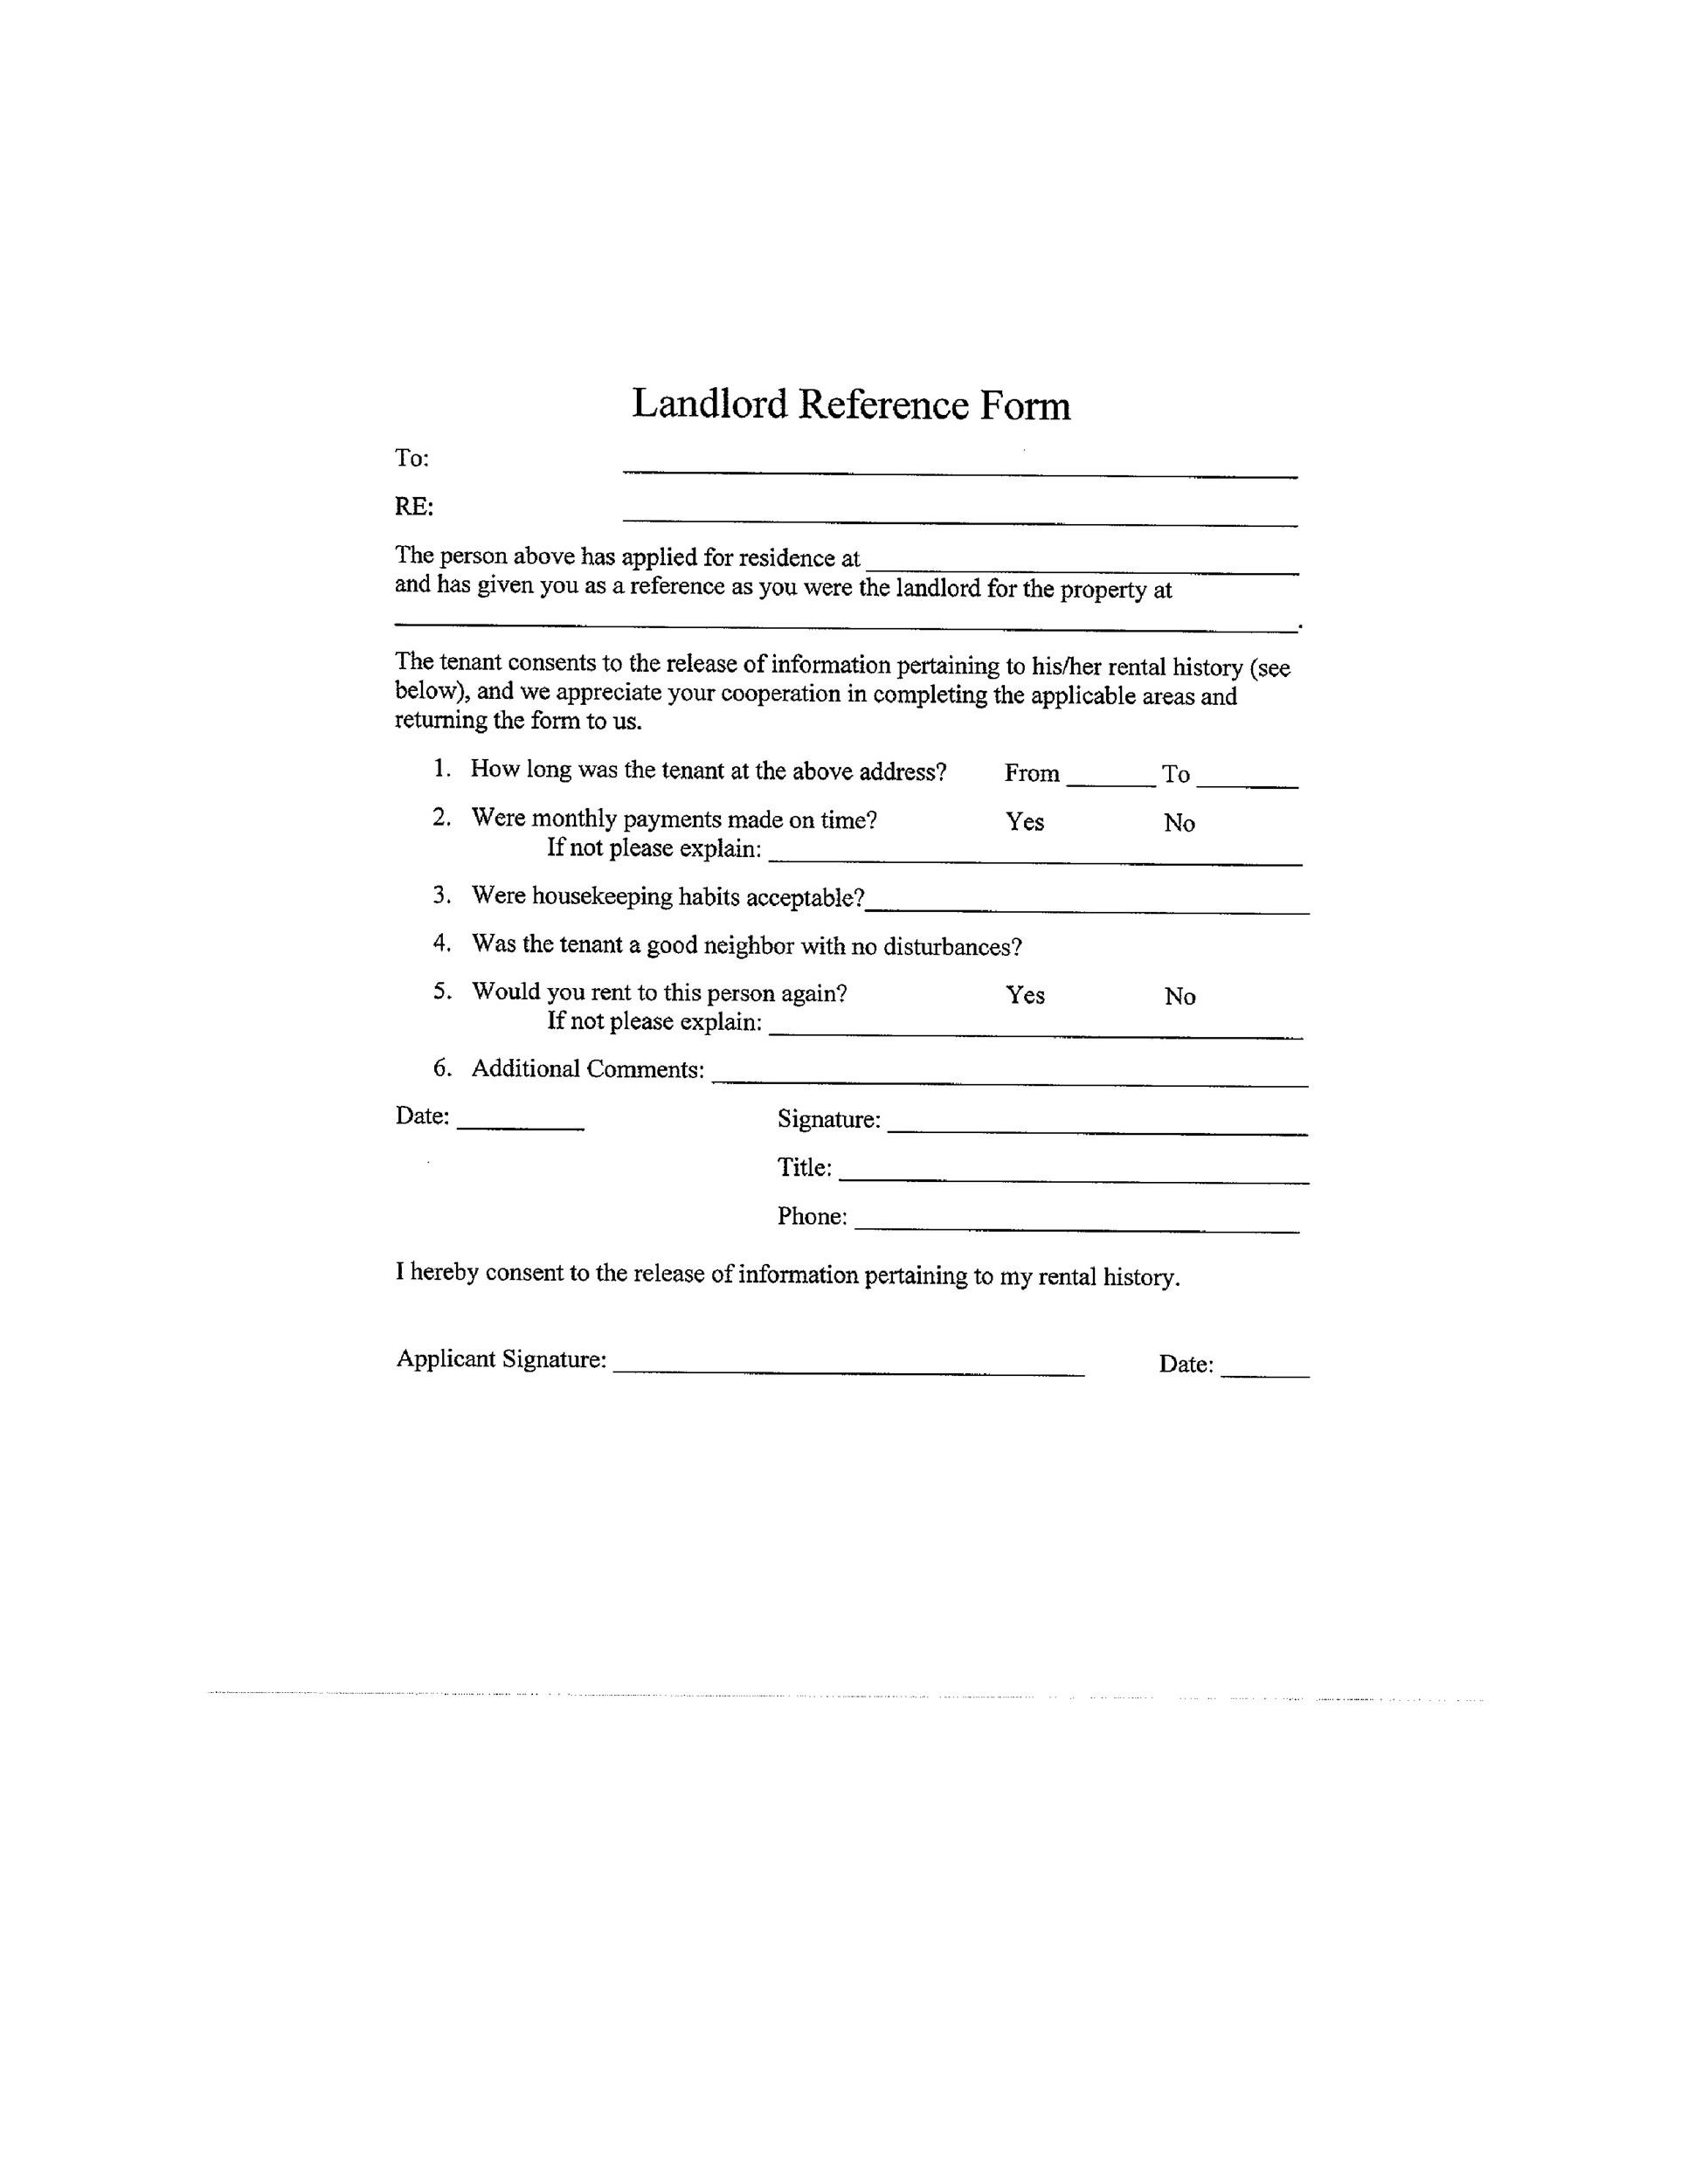 Free landlord reference letter 11